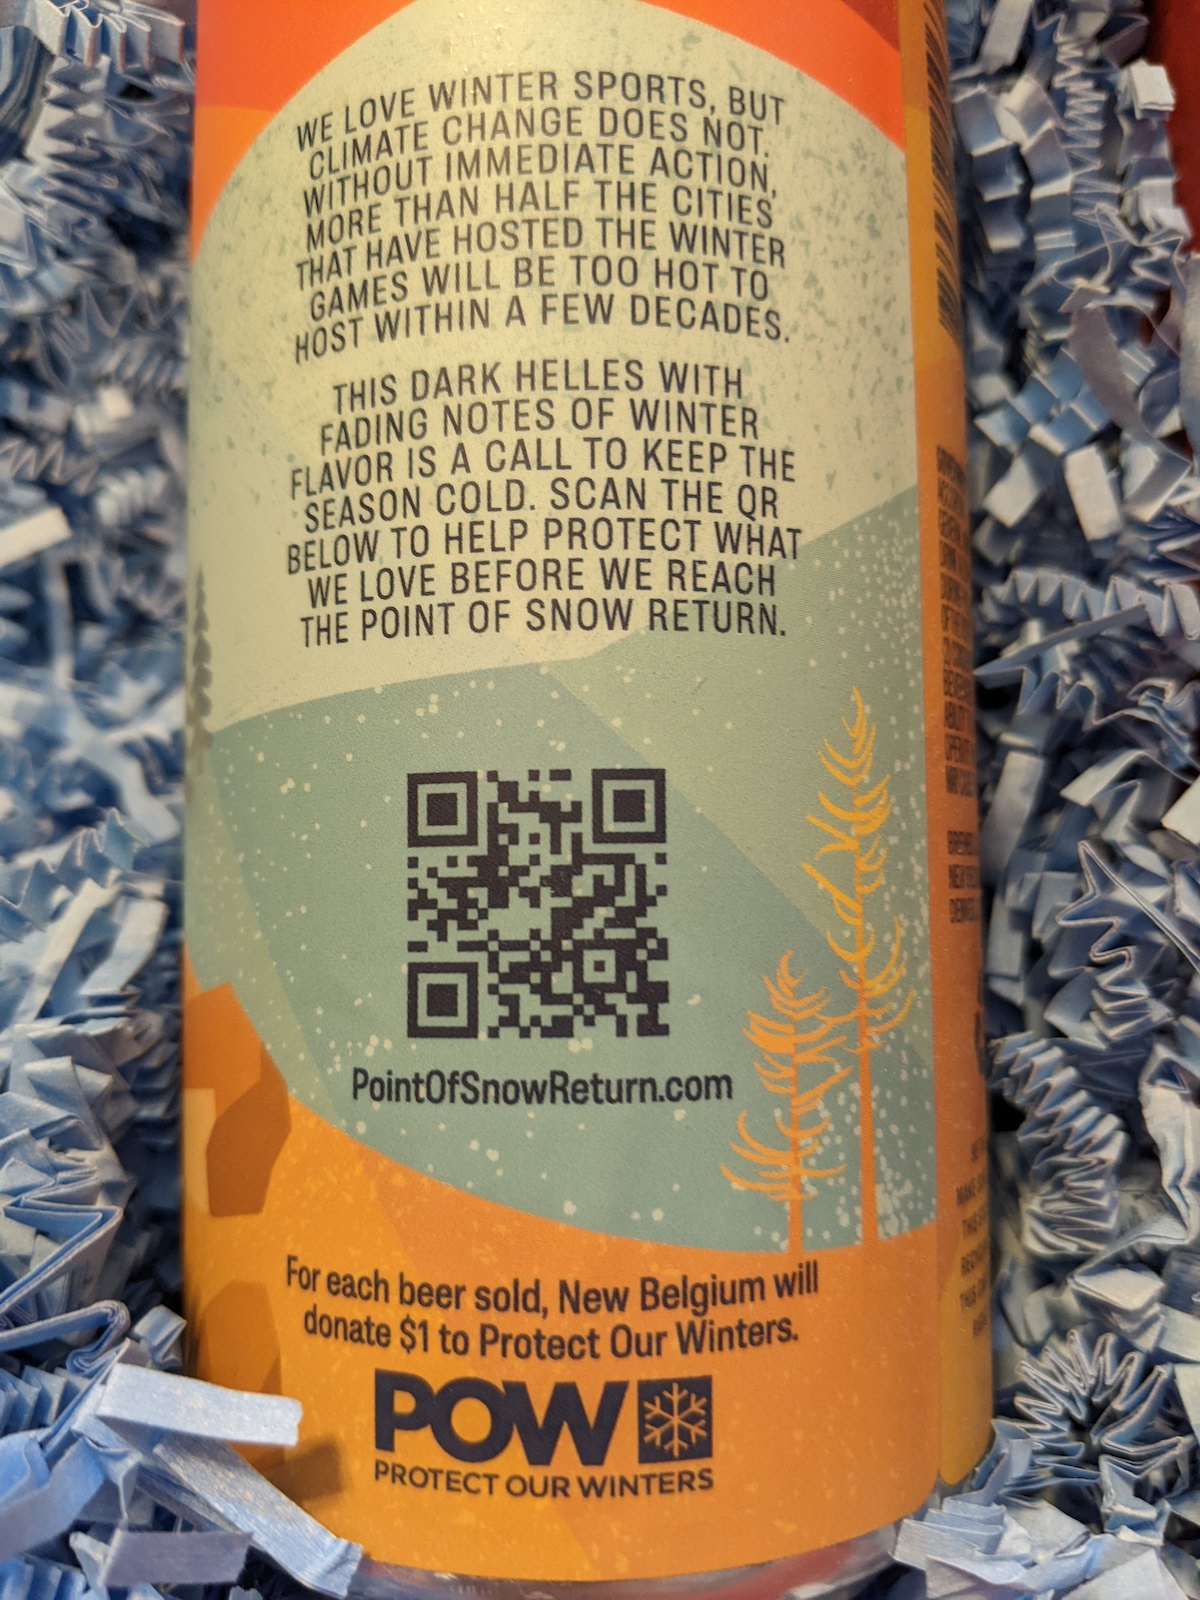 New Belgium Challenges Winter Olympic Sponsors to Put Climate Action Before Ads